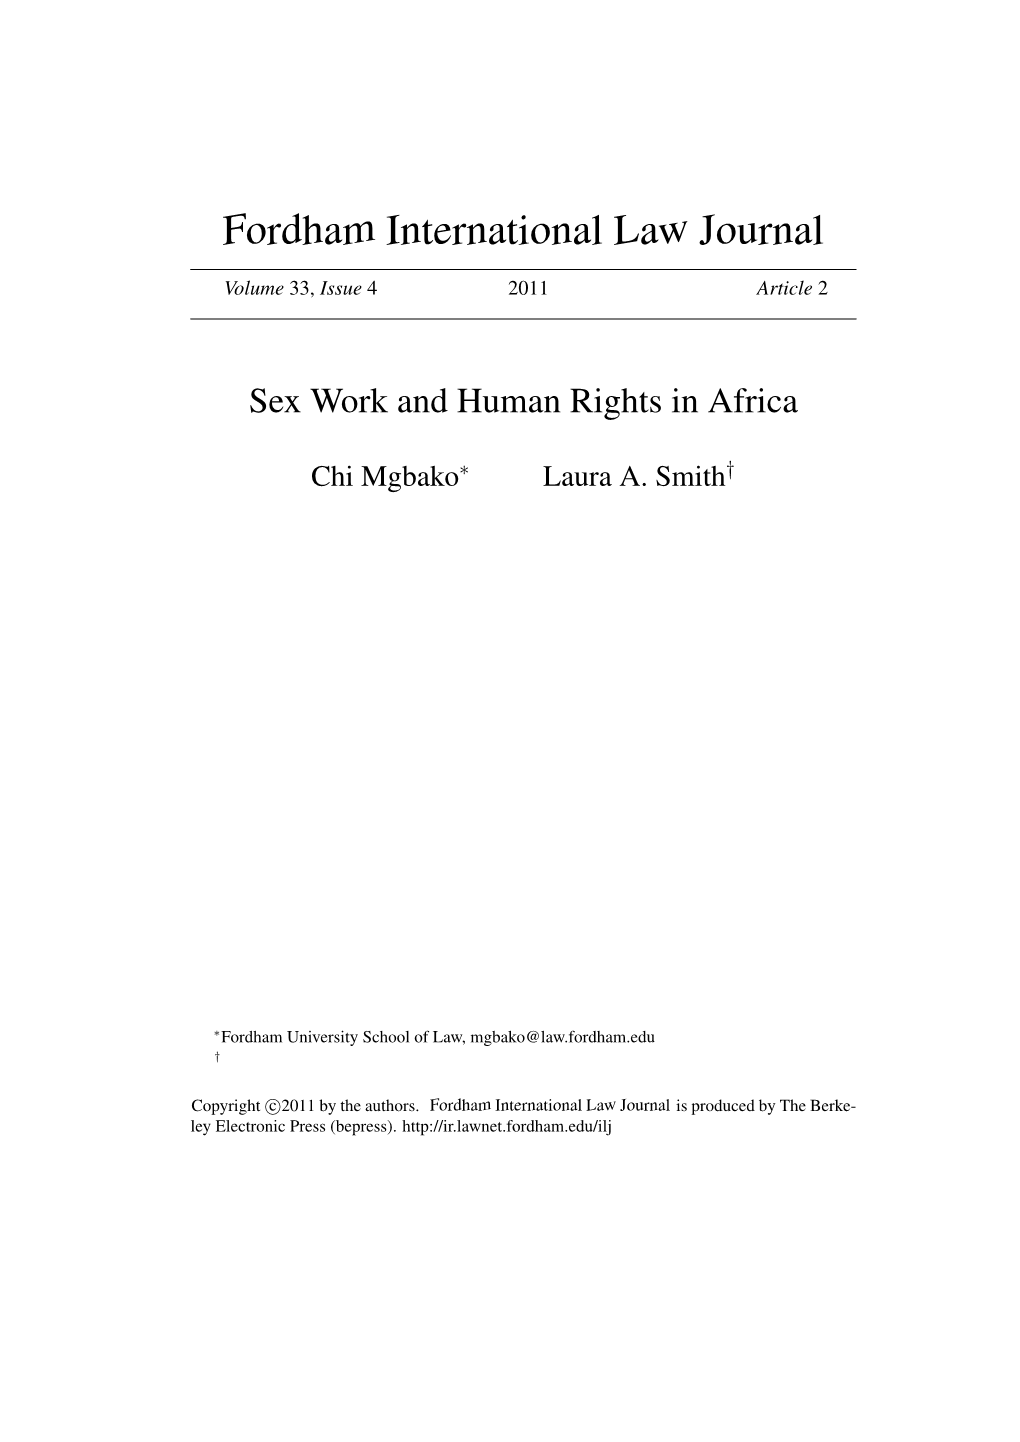 Sex Work and Human Rights in Africa